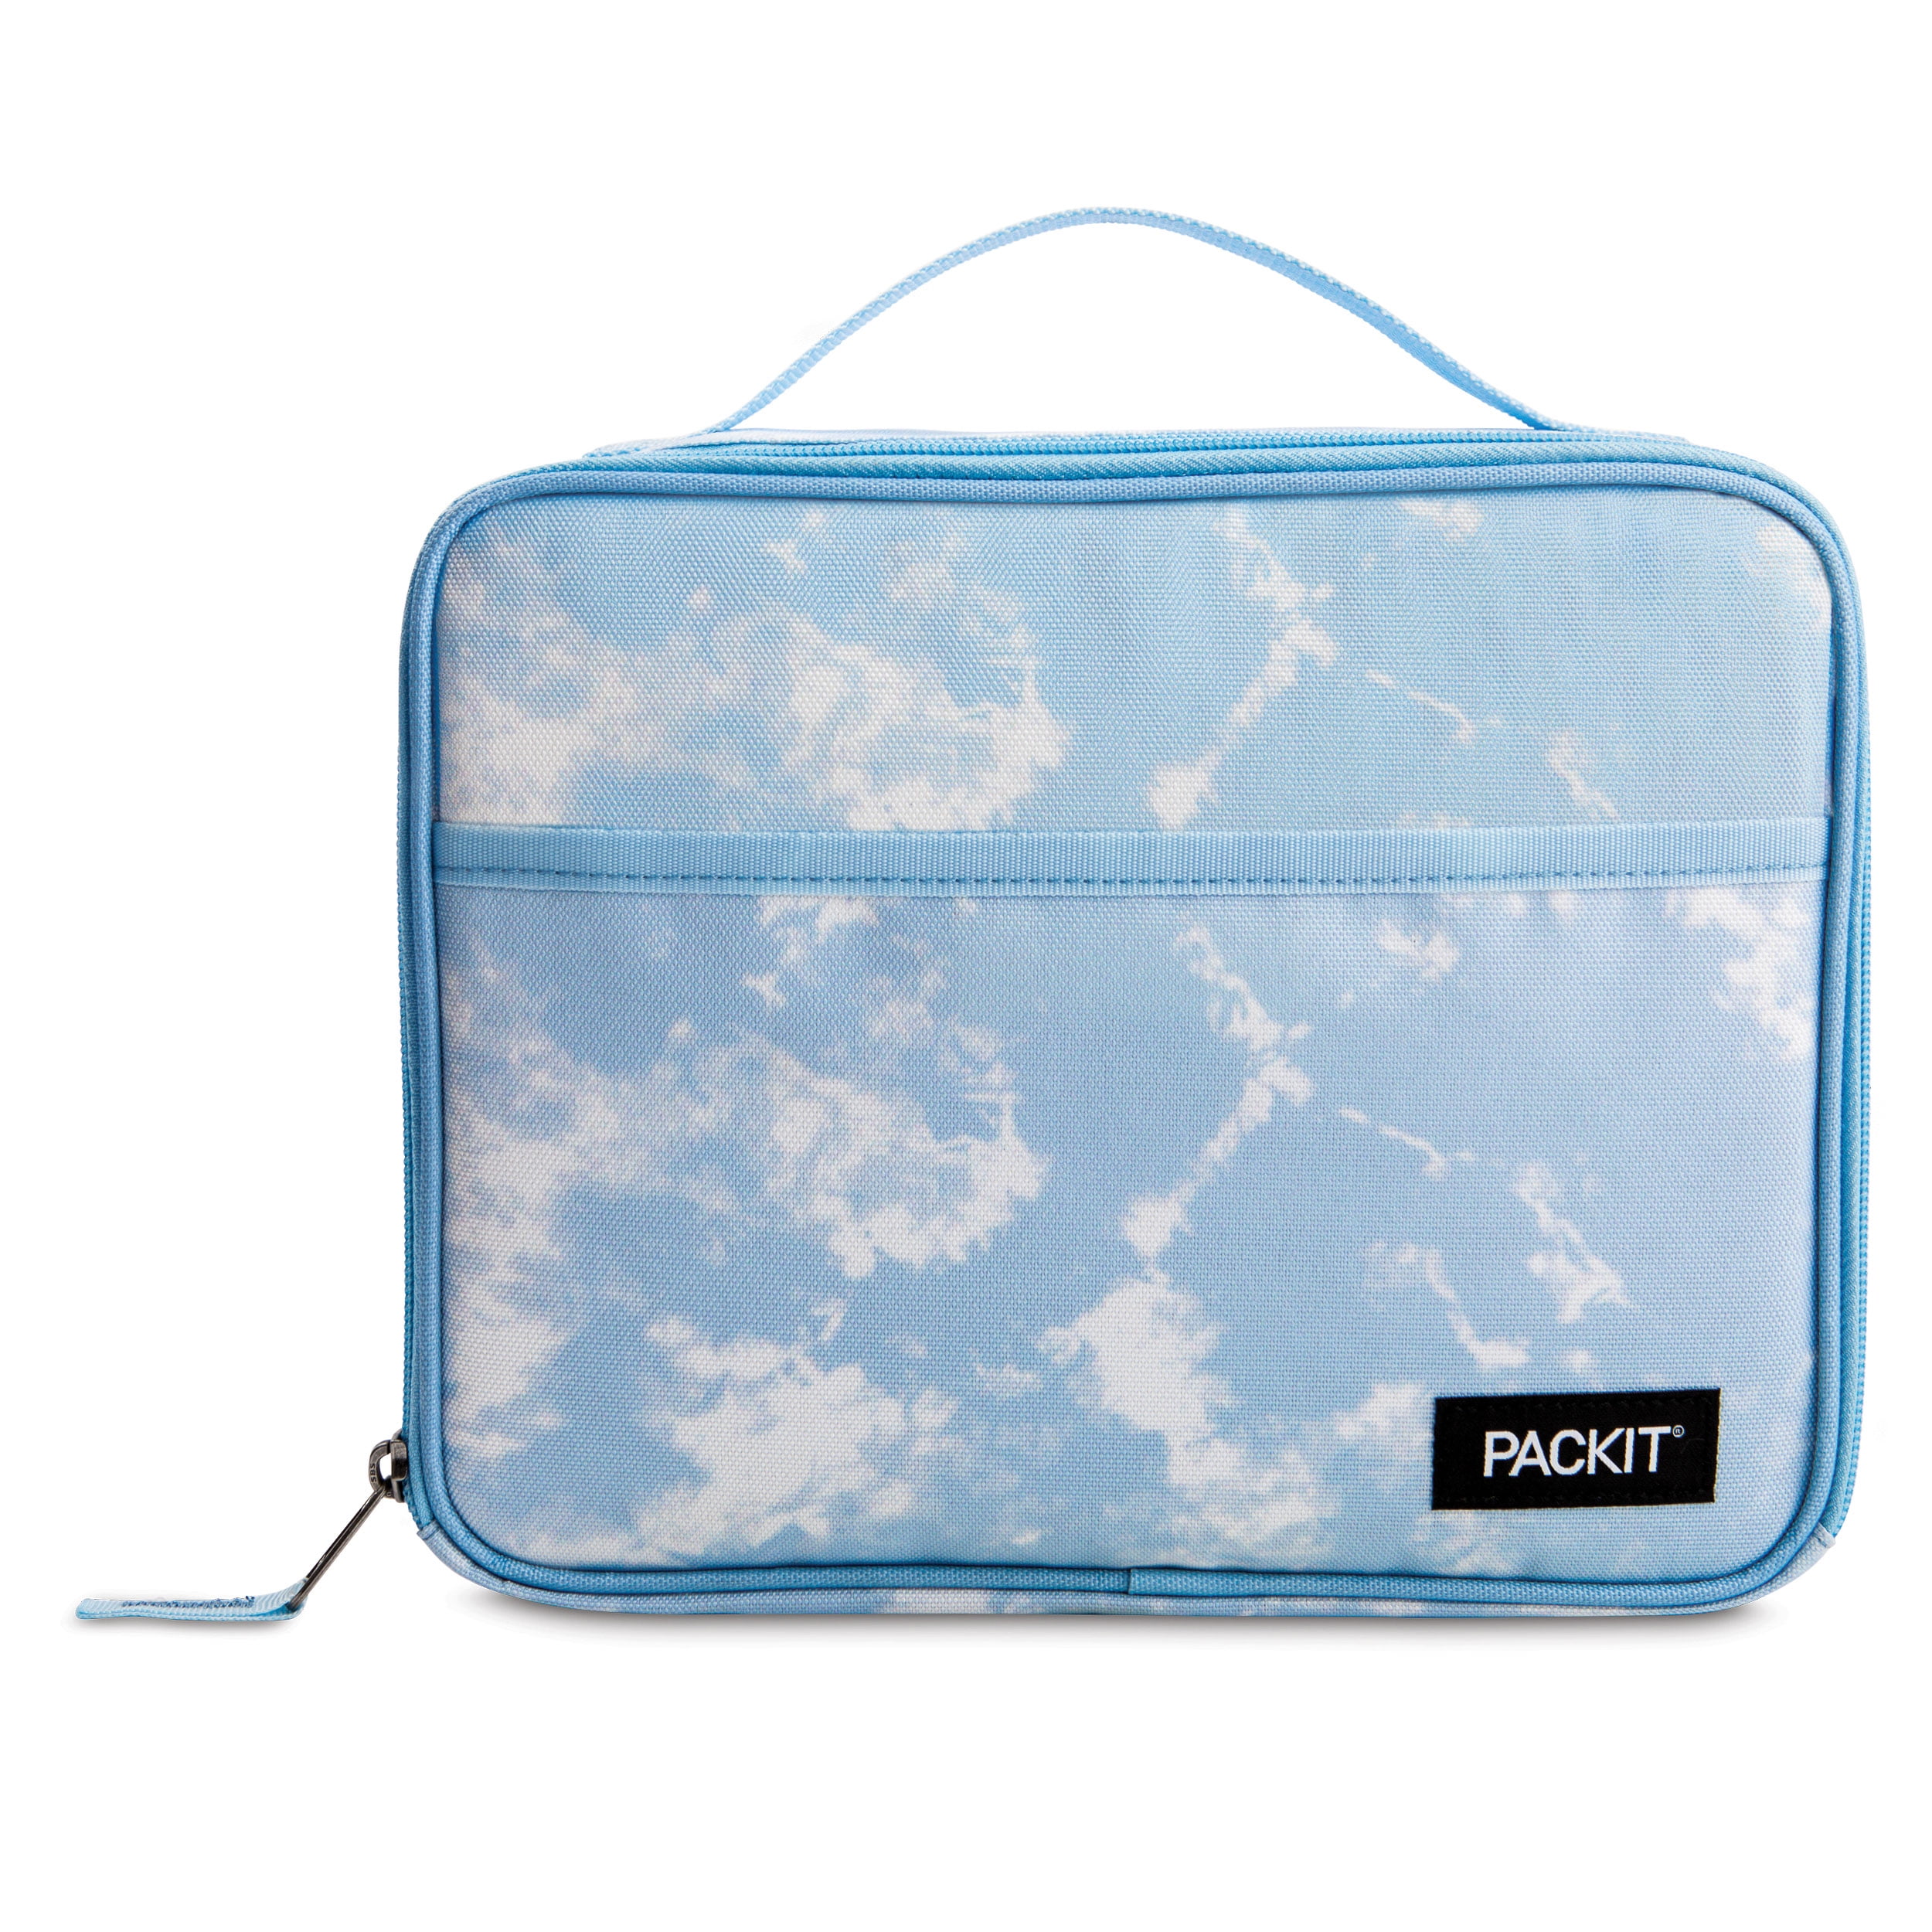 The PackIt Freezable Lunch Bag Is 35% Off at